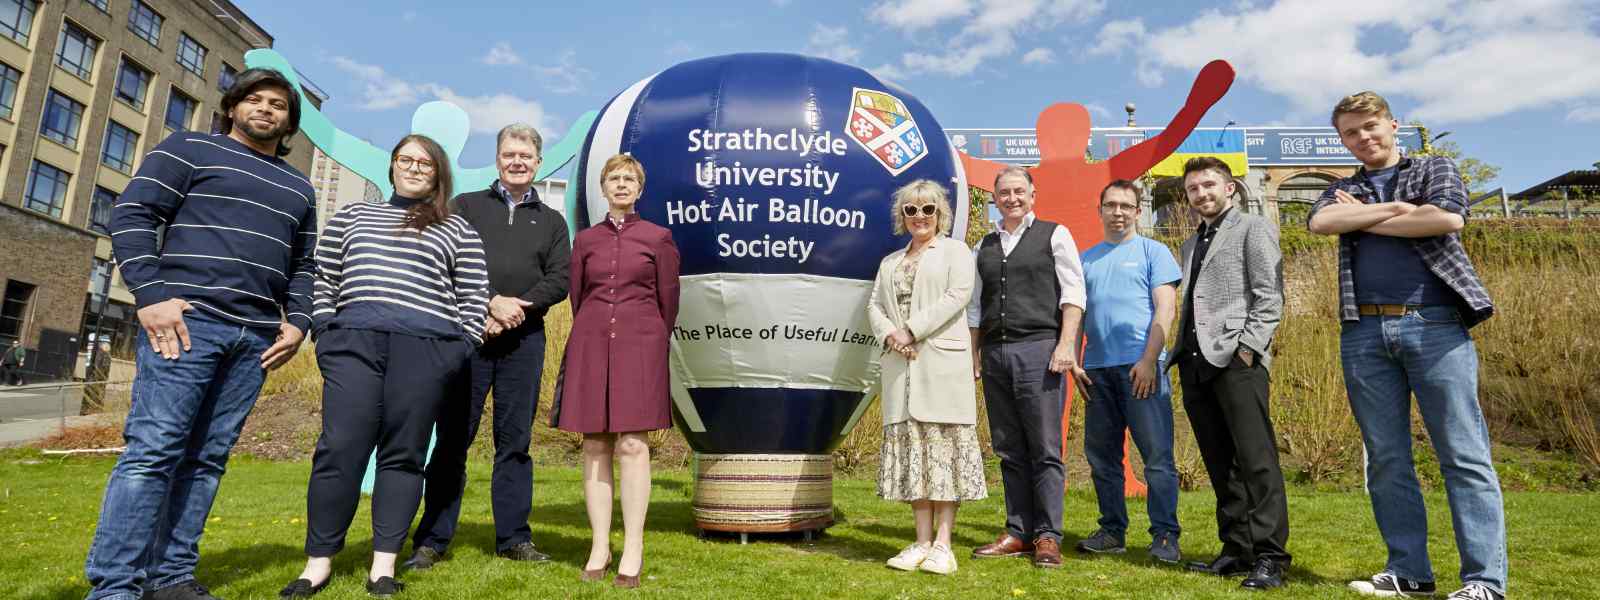 The launch of the SUHABS cold air balloon. Left to right: Sheik Abdul Malik; Maisie Keogh; Vice-Principal Professor Scott MacGregor; Chief Digital and Information Officer Beth Lawton; Associate Principal Professor Eleanor Shaw; Principal Professor Sir Jim McDonald; pilot Douglas Hoddinott; Chris Lawlor of Lawlor Technologies; Ru Wallace VP Community of Strathclyde's Students' Union. Photo by Guy Hinks